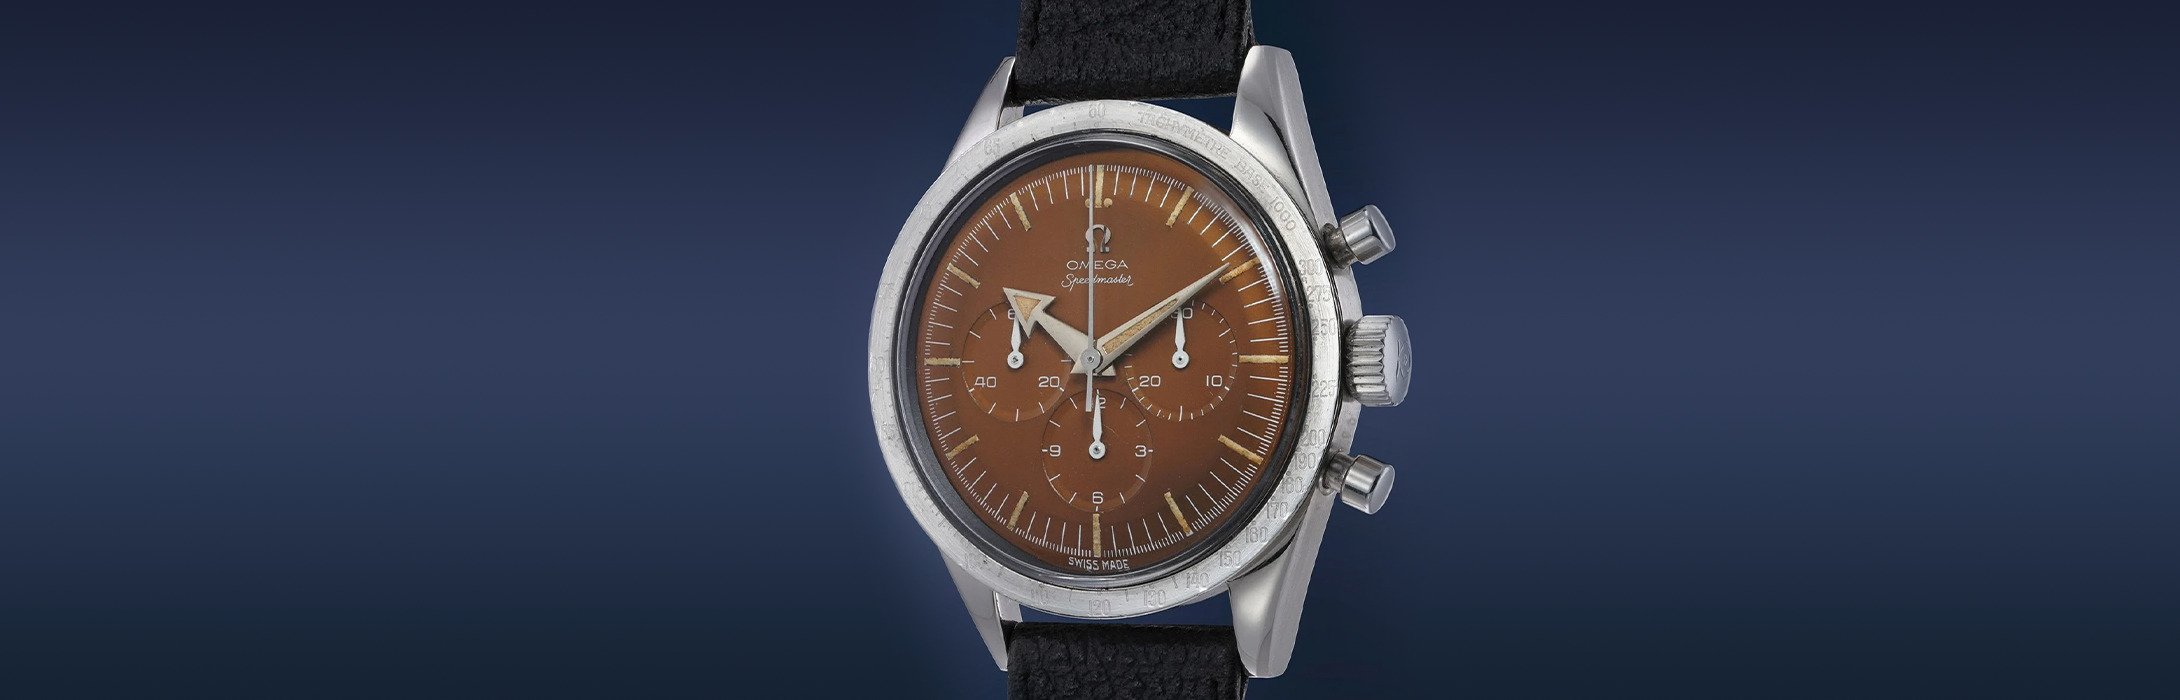 The Most Expensive Omega Watch Ever